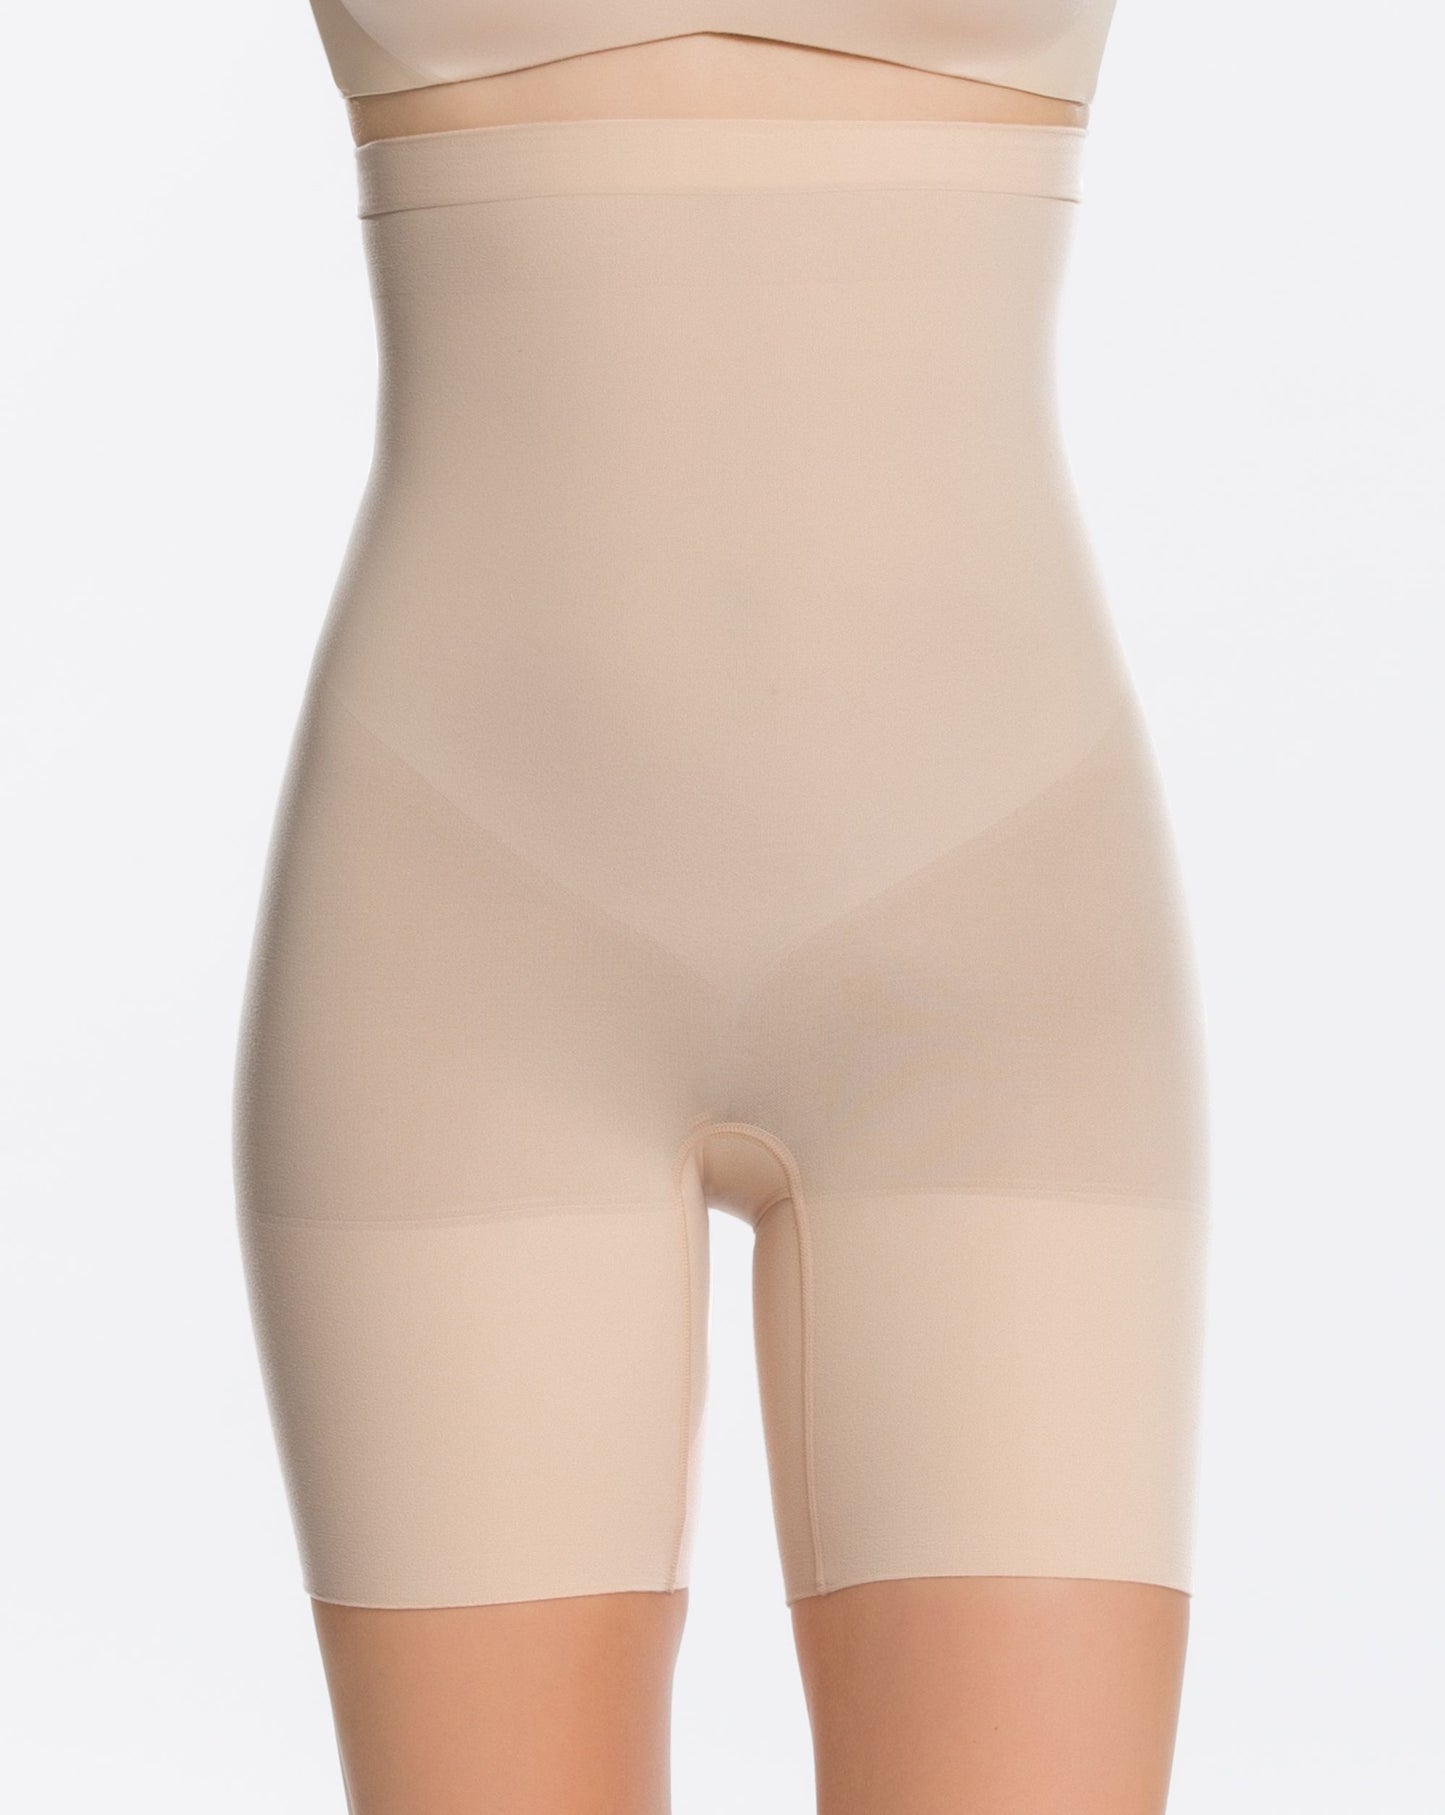 HIGHER POWER SHORTS BY SPANX